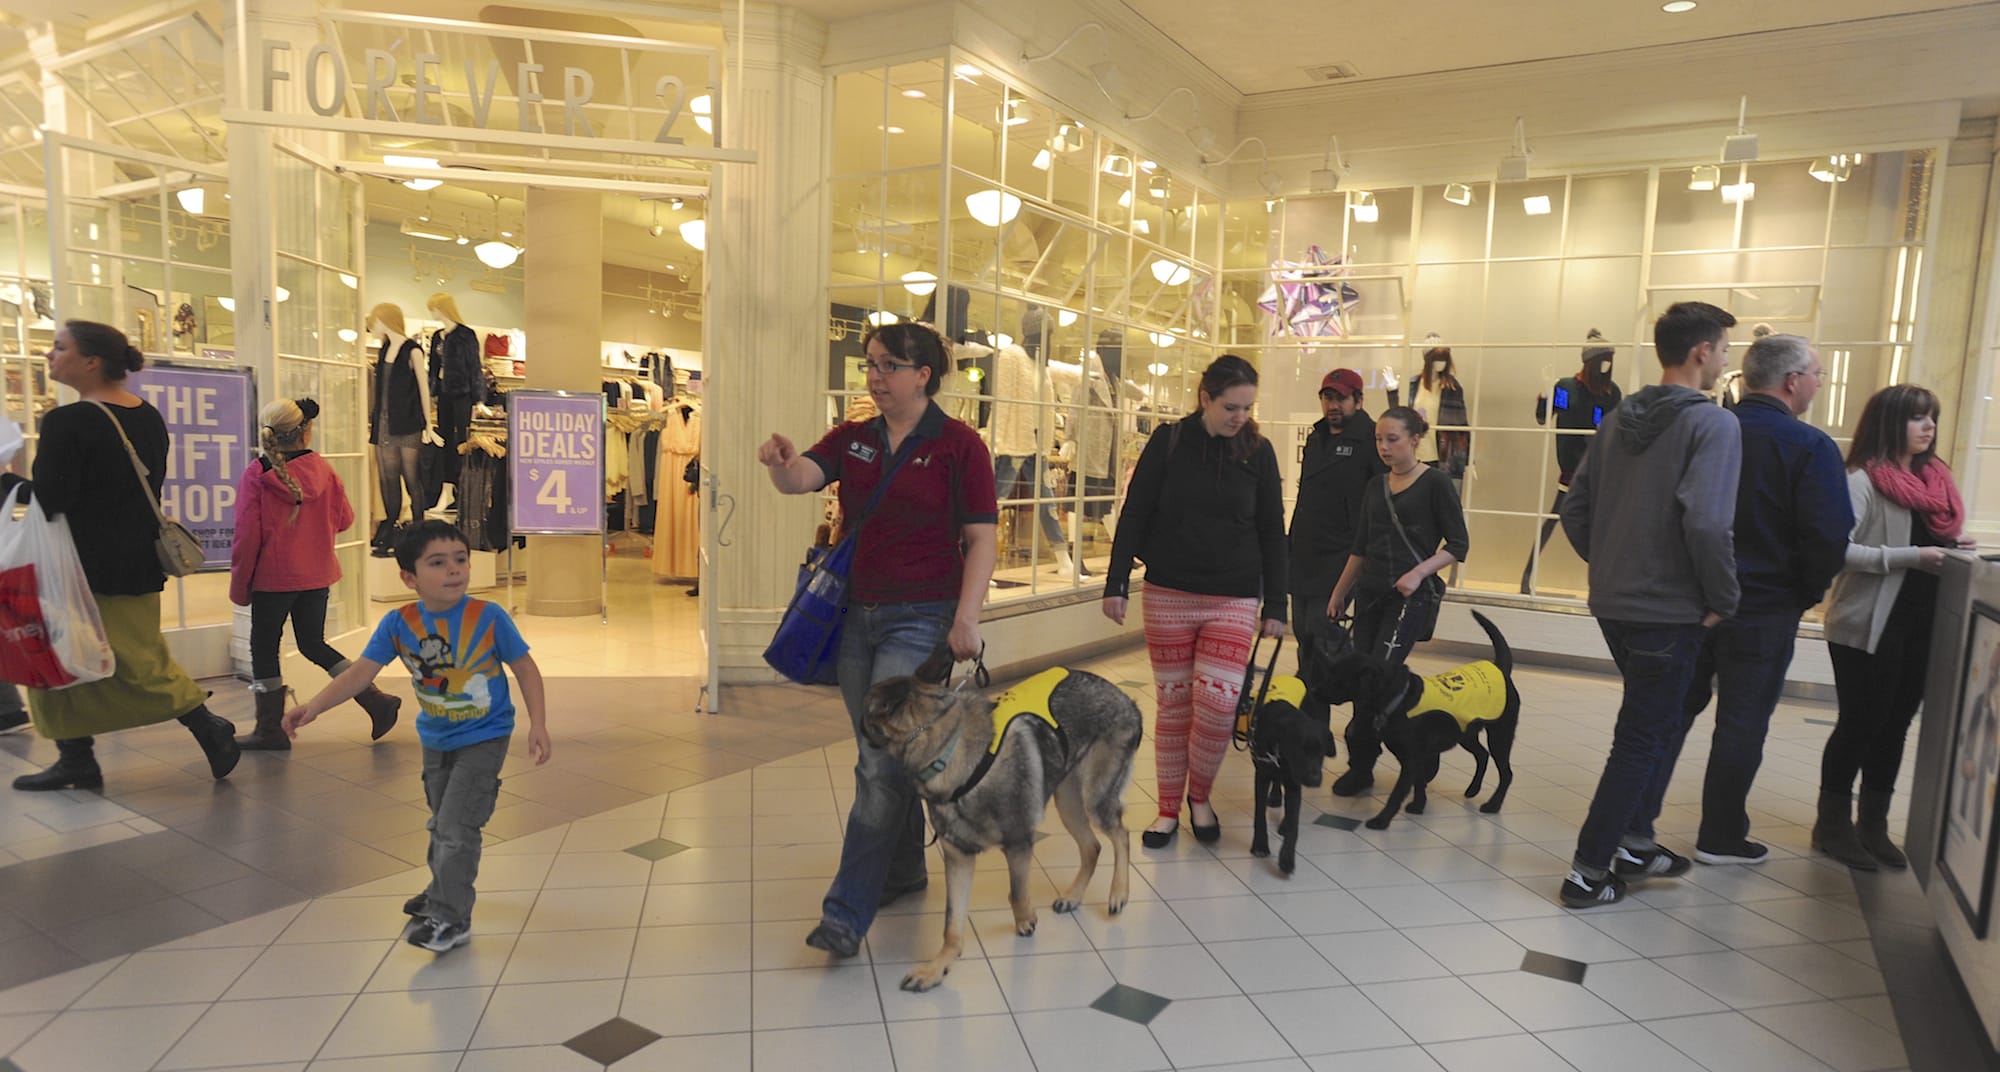 Becca Khalil, center, with her son Adrian, at left, leads Izaac, a service dog in training, during an exercise earlier this month at Westfield Vancouver mall.